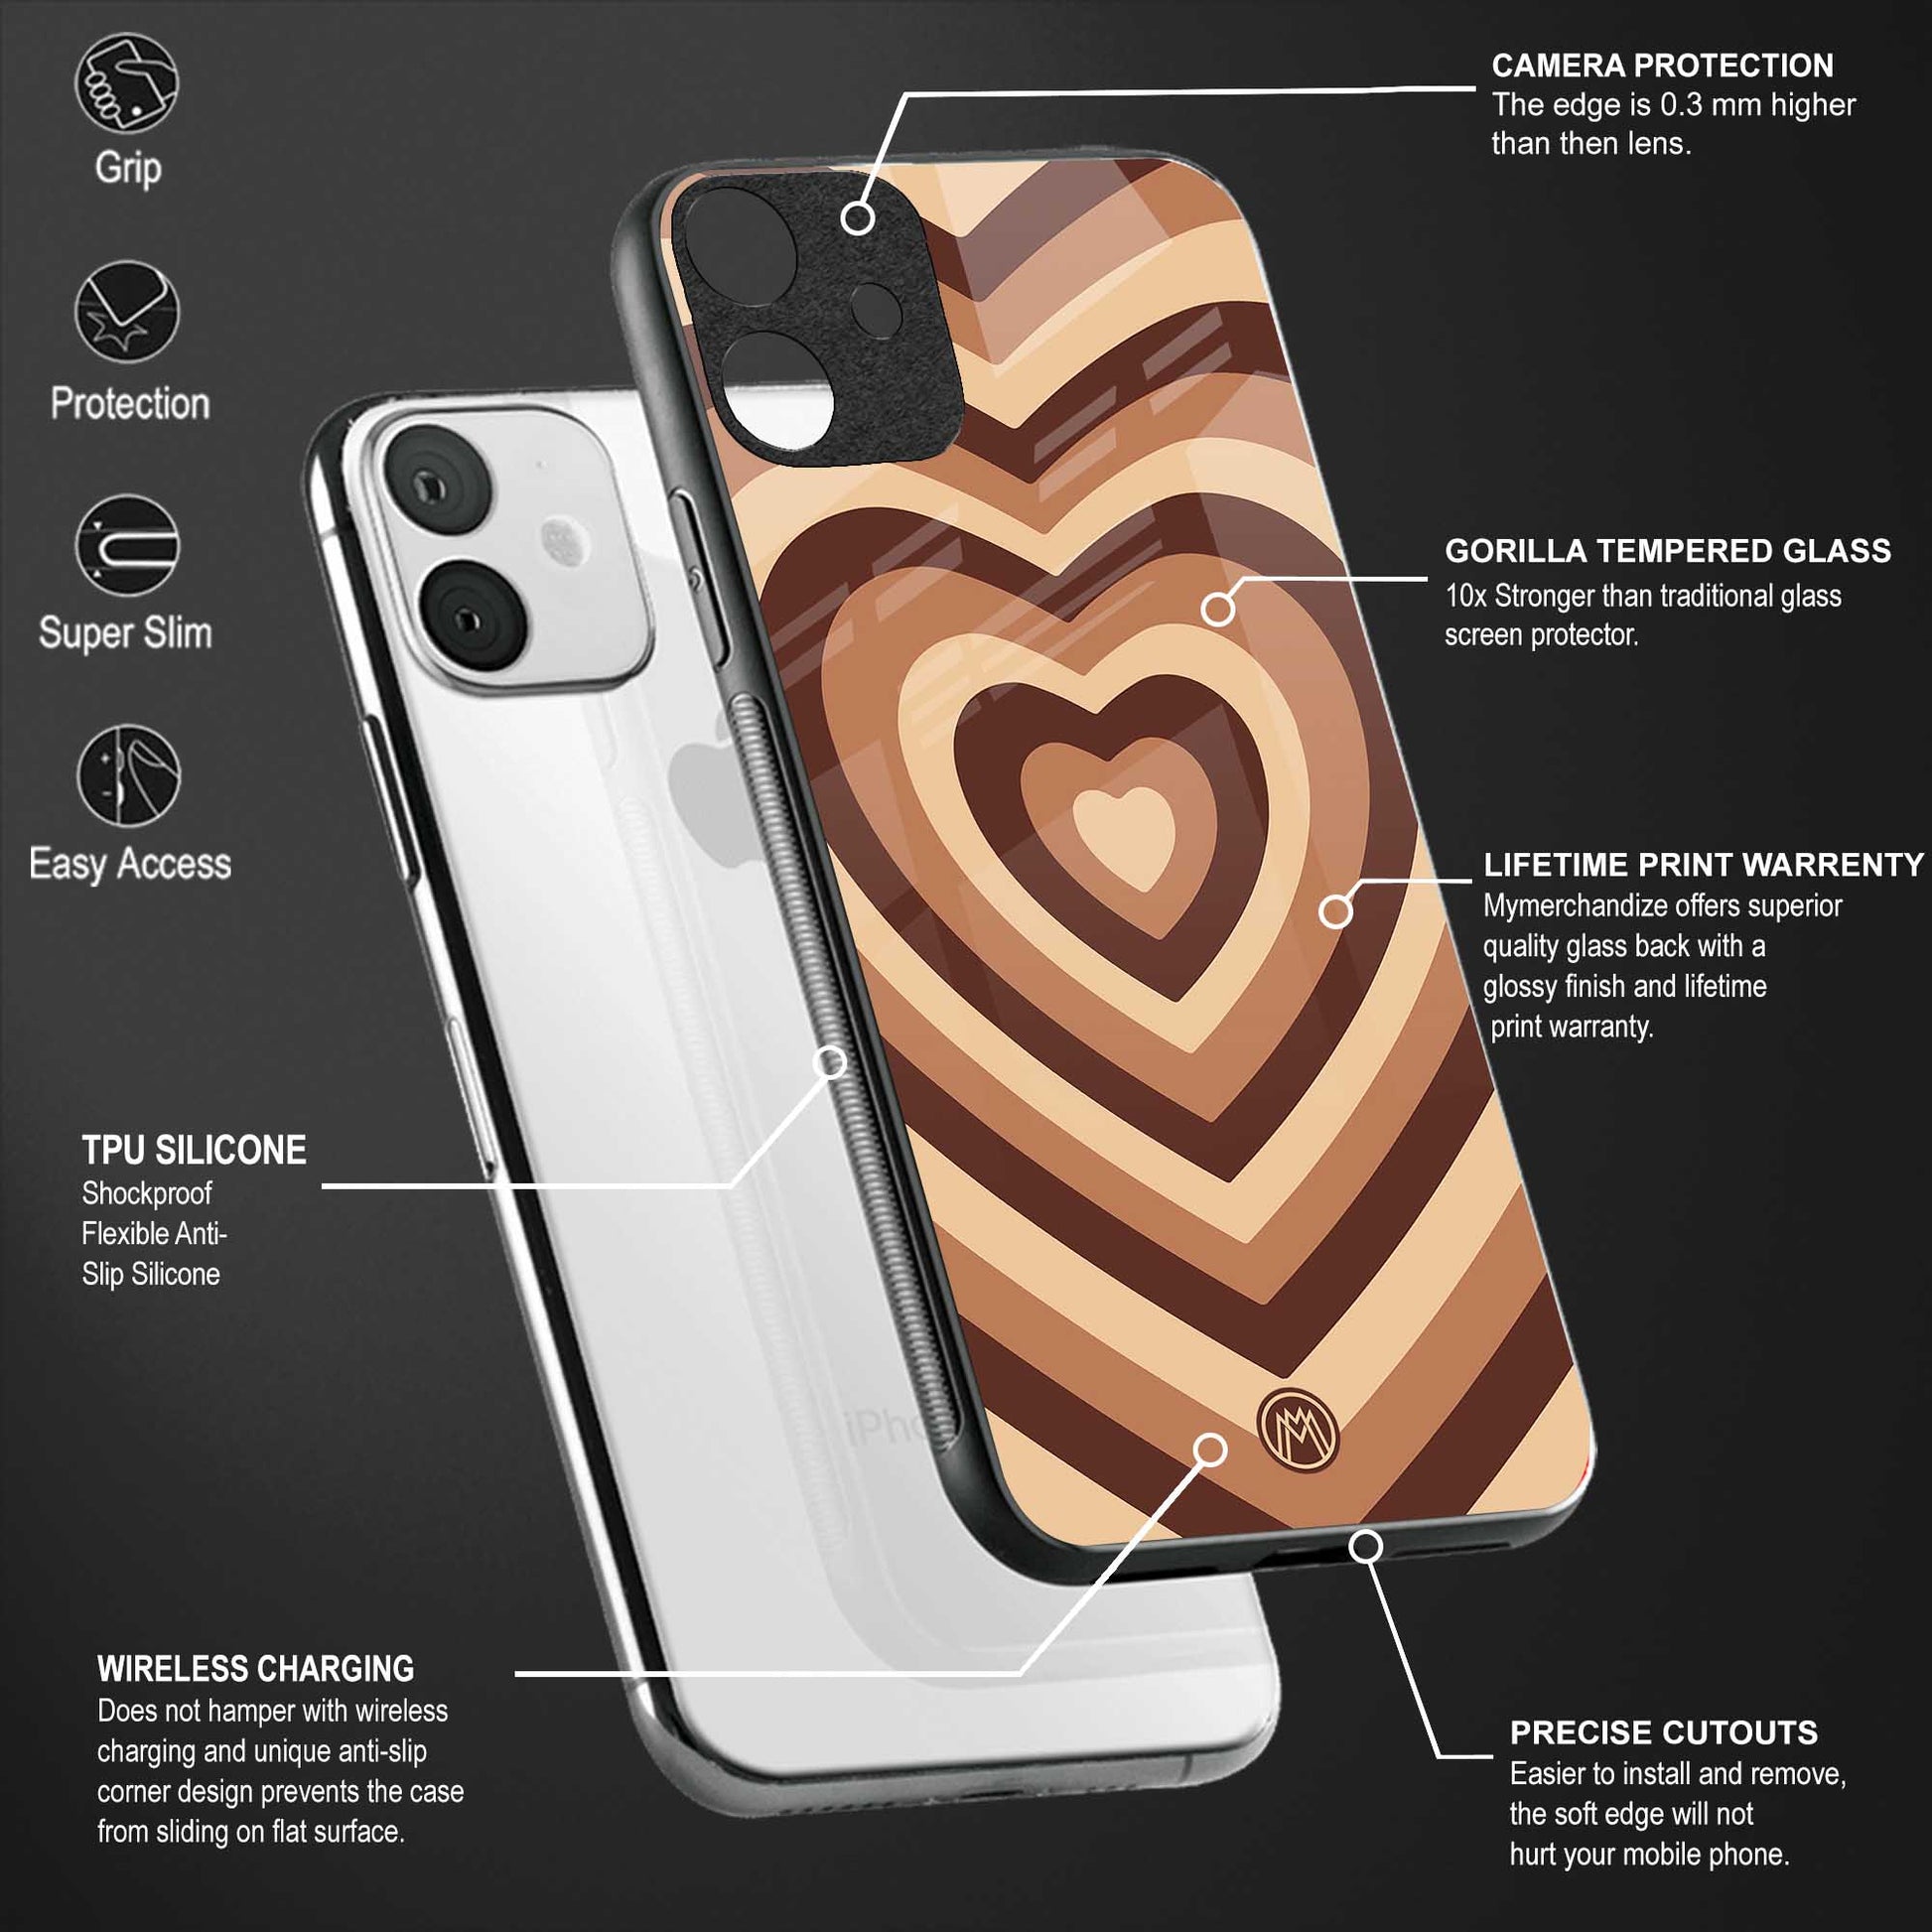 y2k brown hearts aesthetic back phone cover | glass case for oneplus 10t